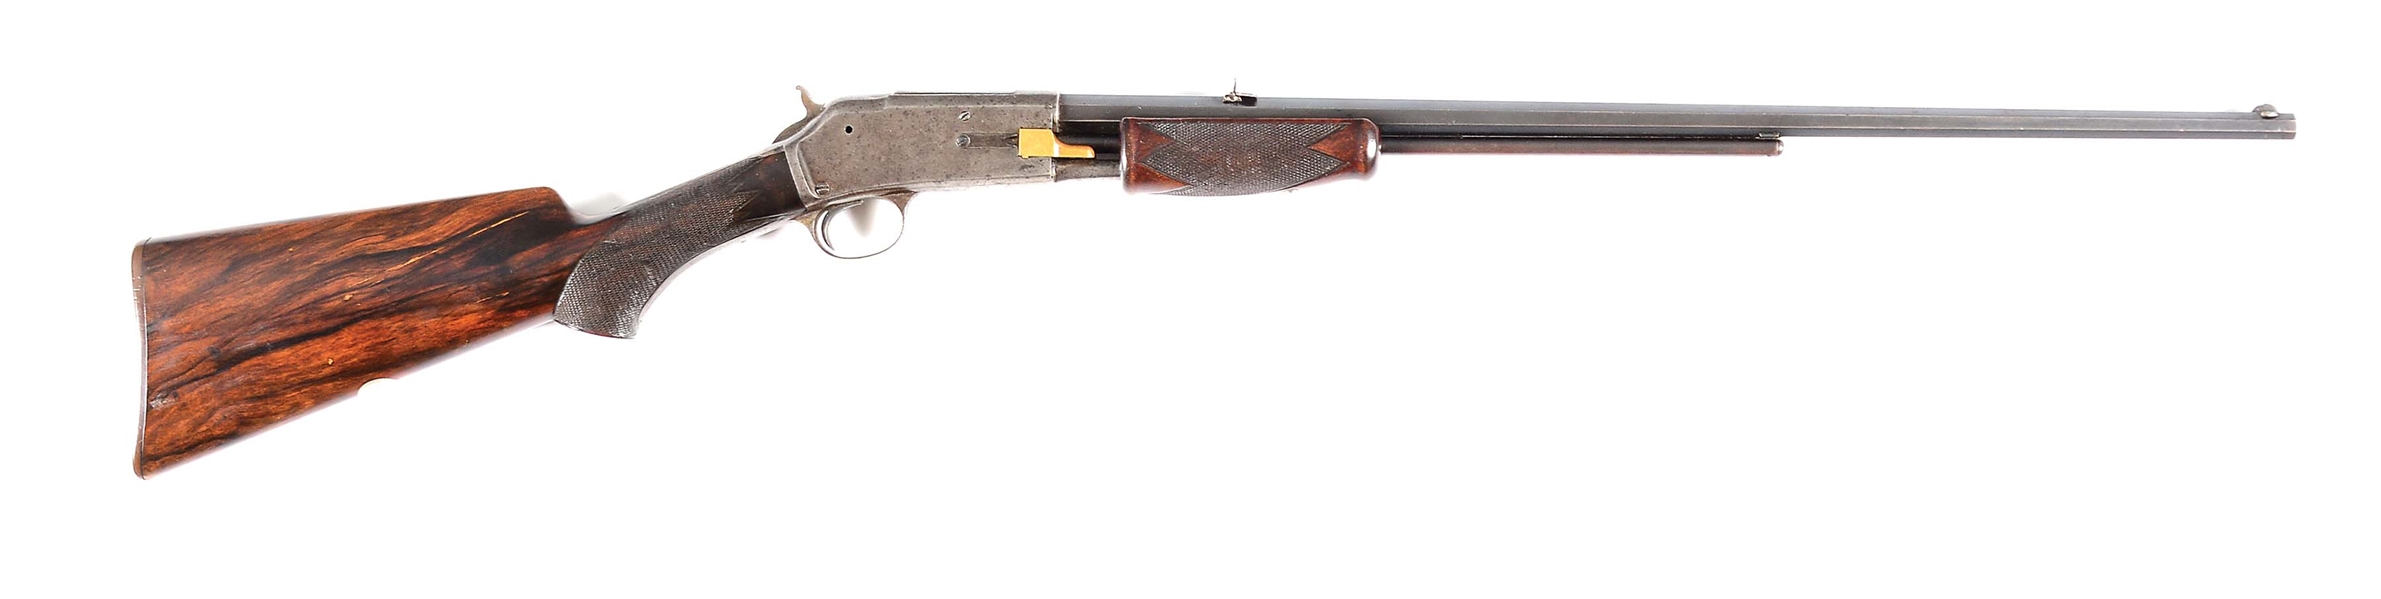 (A) COLT LIGTHING DELUXE SMALL FRAME SLIDE ACTION RIFLE.